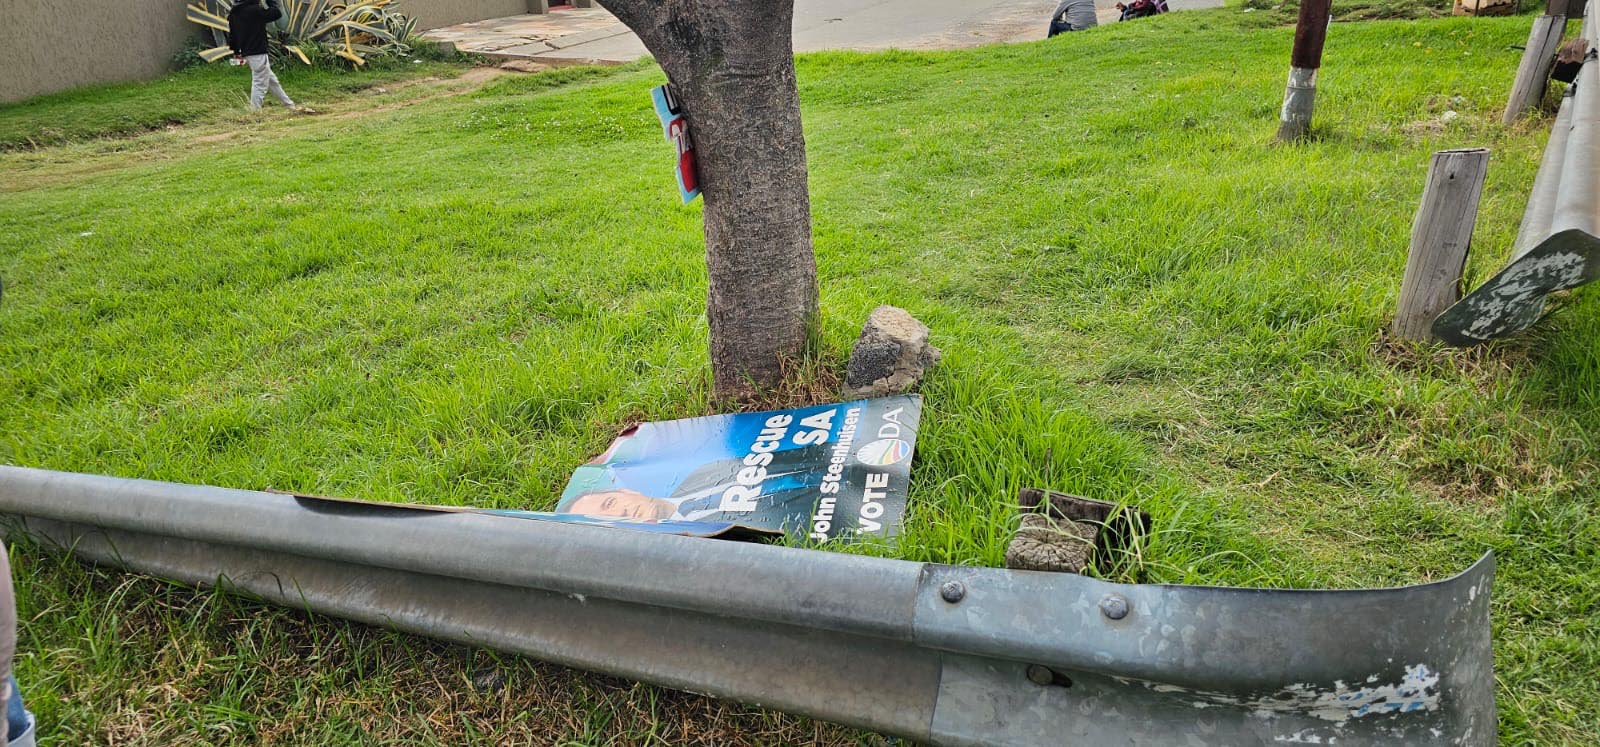 dirty tricks – poster wars spark intimidation and sabotage allegations ahead of sa’s may 29 polls